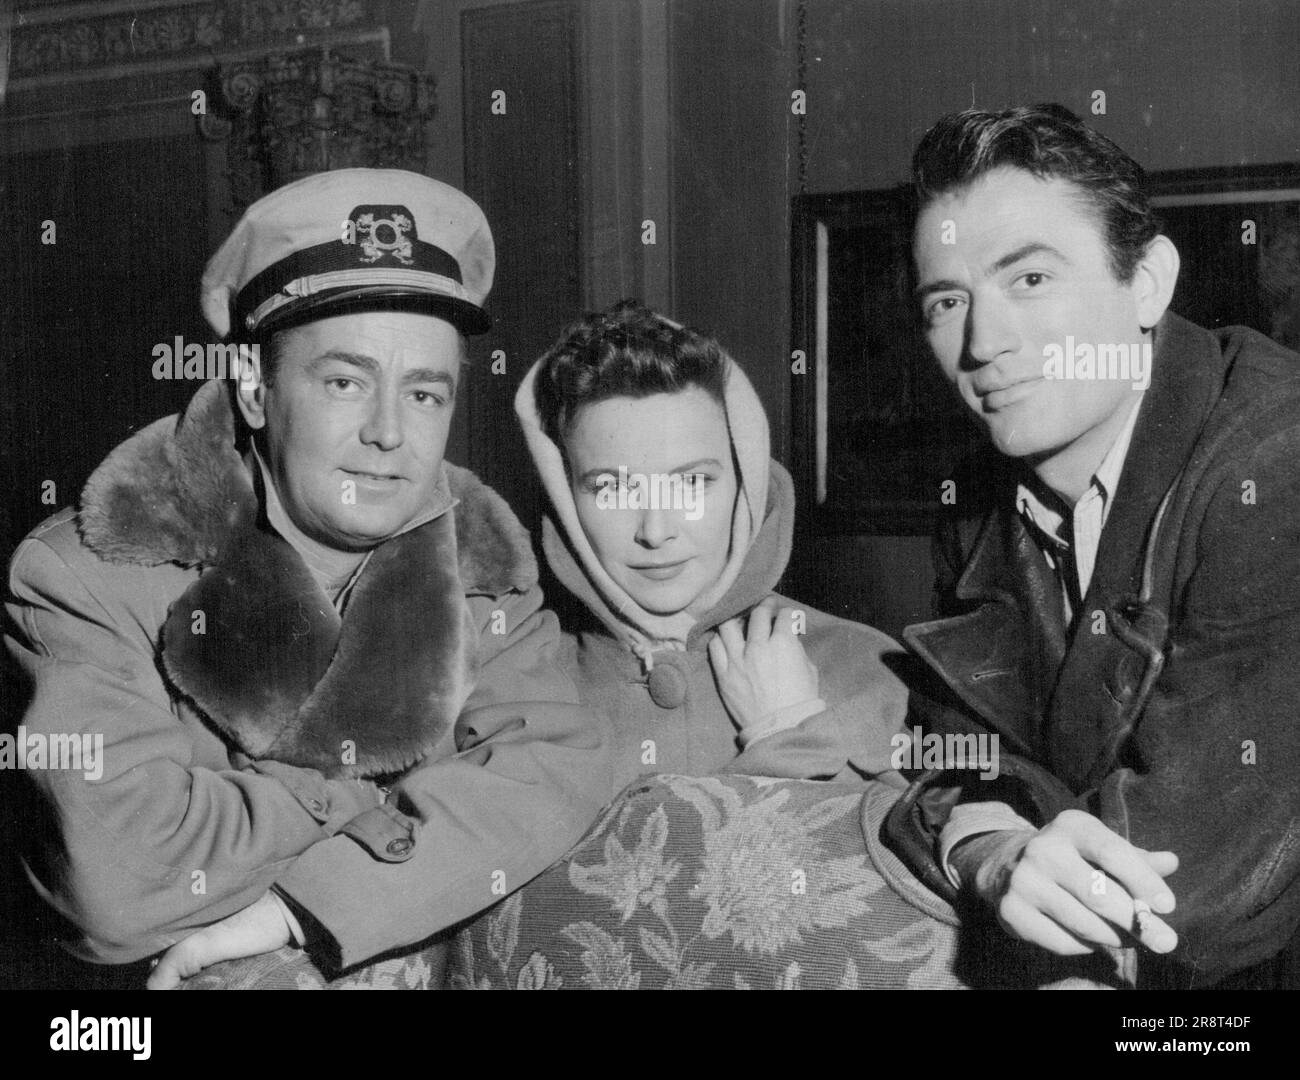 uYanks Who Are Playing Away -- Handsome and glamorous American trio in an 'away from home' chat are all currently filming at Pinewood, England. Gregory Peck, right, paid a visit to his old friend Alan Ladd on the 'Hell Bellow Zero' set and met Ladd's new leading lady, actress Joan ('Little Hut') Tetzel. 'Hell Below Zero' is a Warwick films Technicolor production for Columbia release. May 11, 1953. (Photo by Reuterphoto). Stock Photo